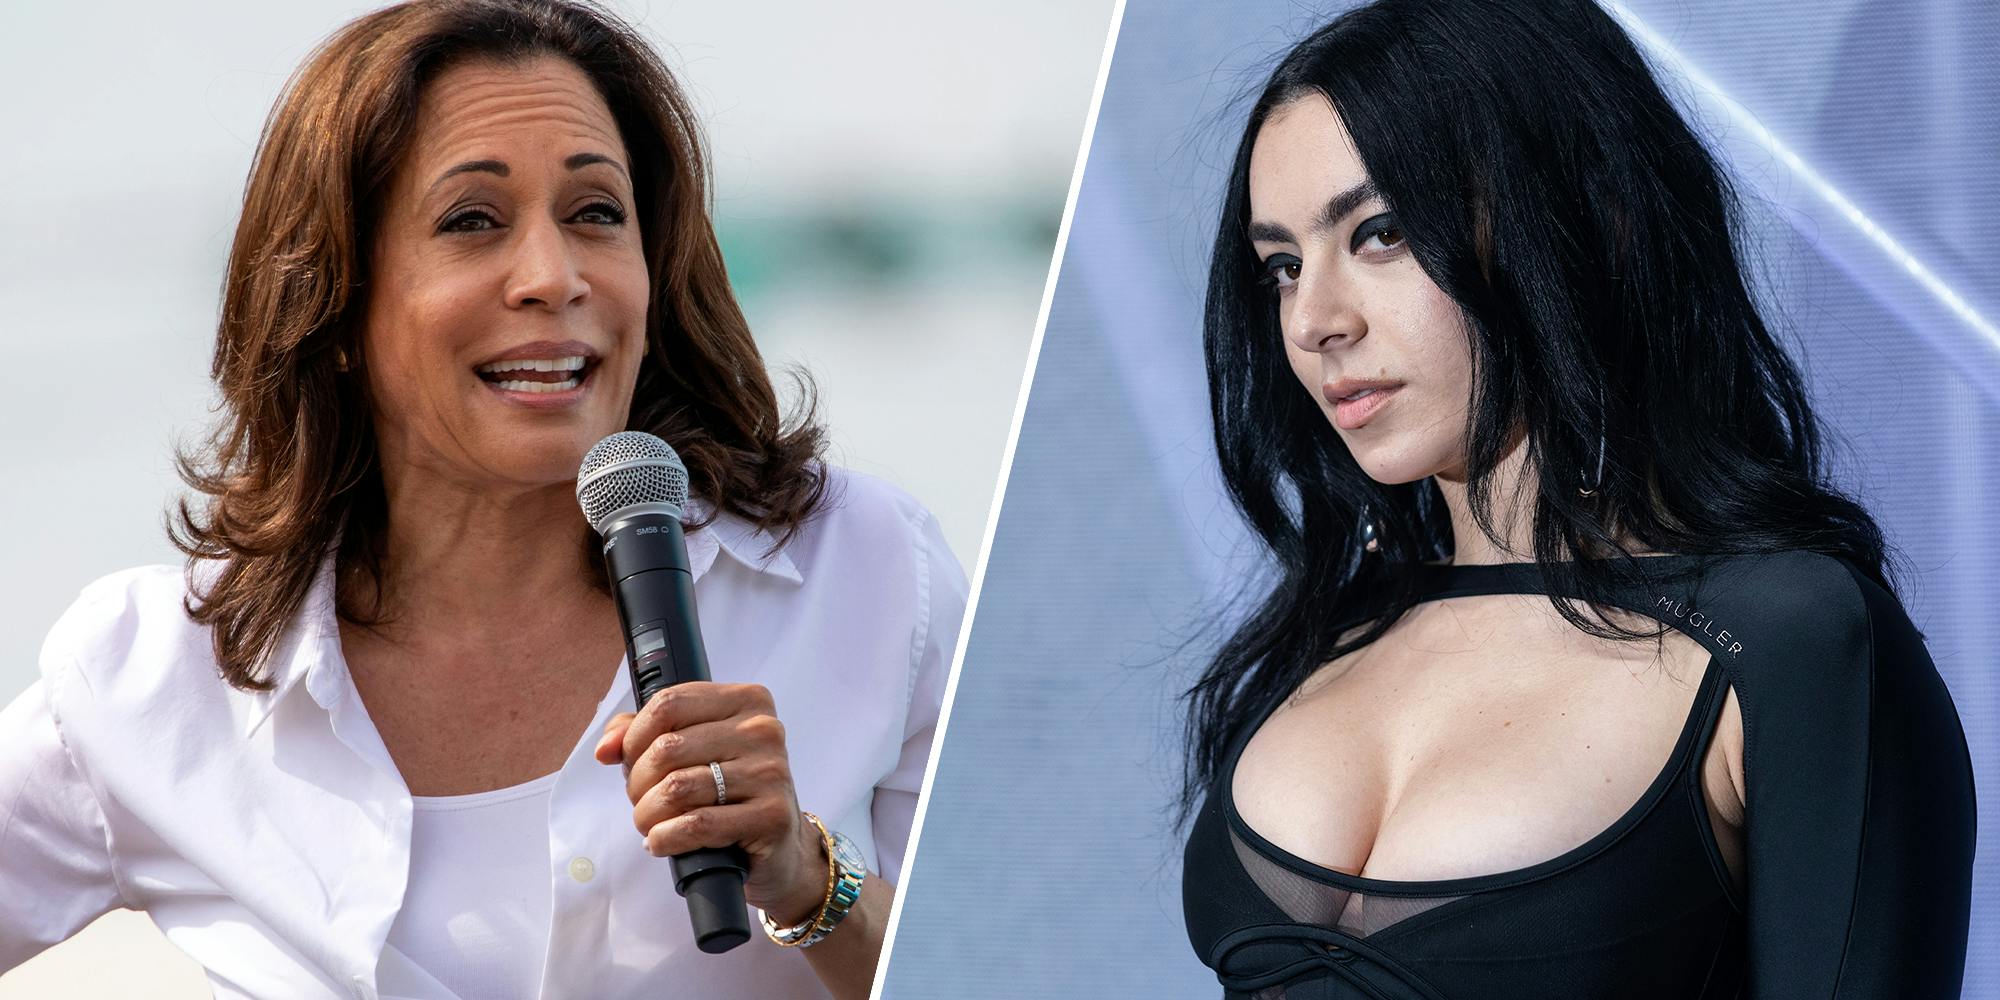 Harris takes inspiration from Charli XCX as she kicks off presidential campaign